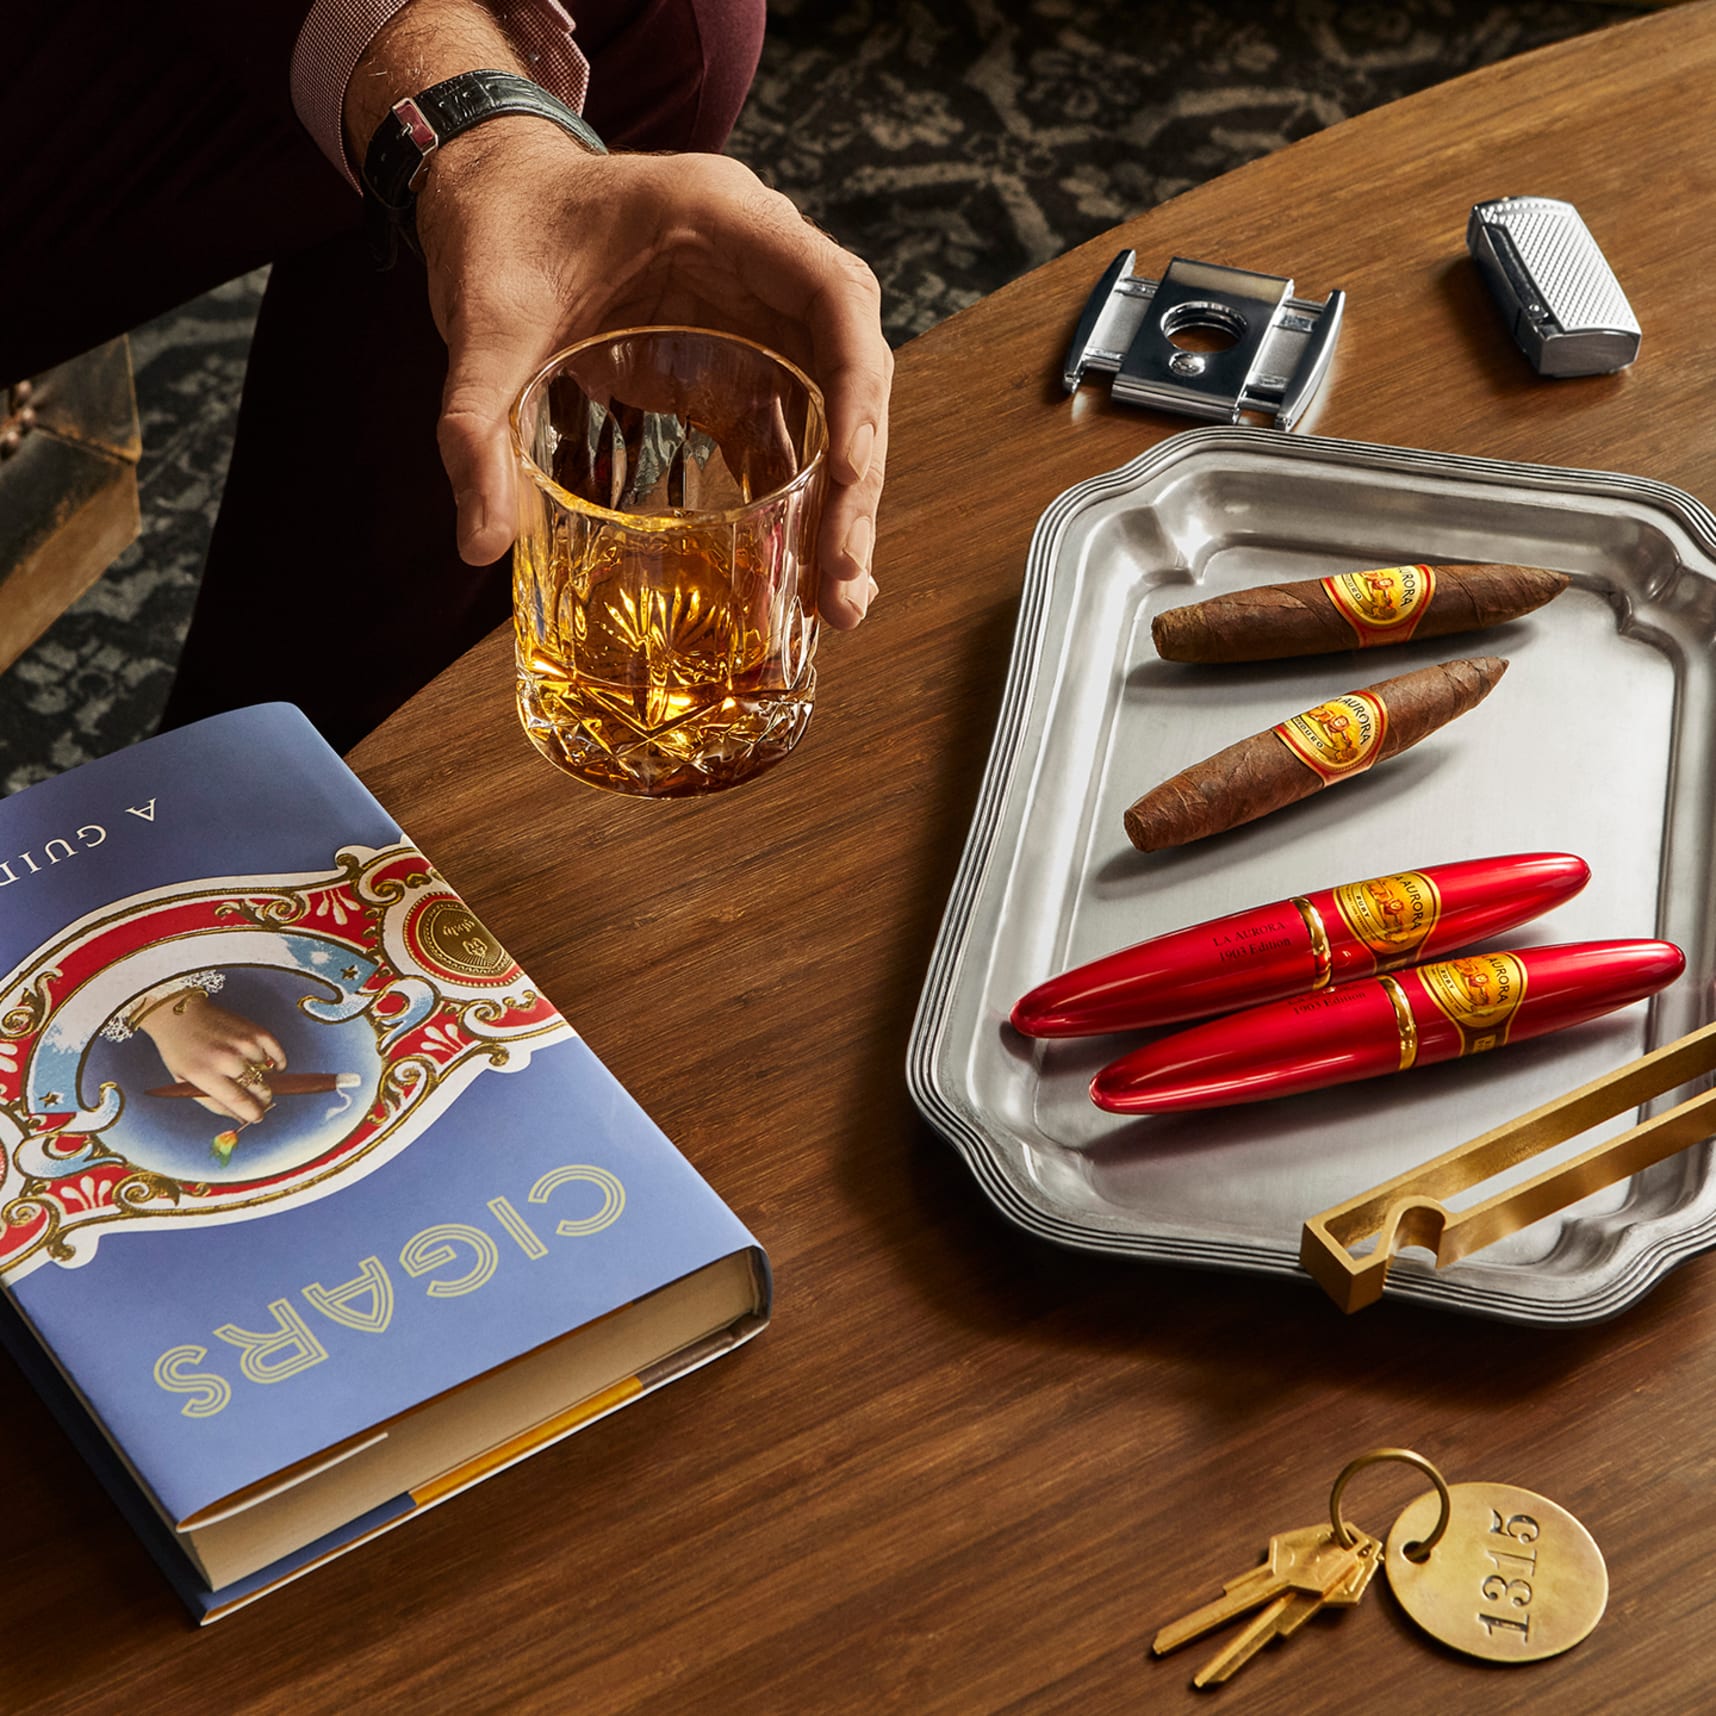 close up of tray with red cigar tubes and man's hand holding bourbon glass next to cigar book